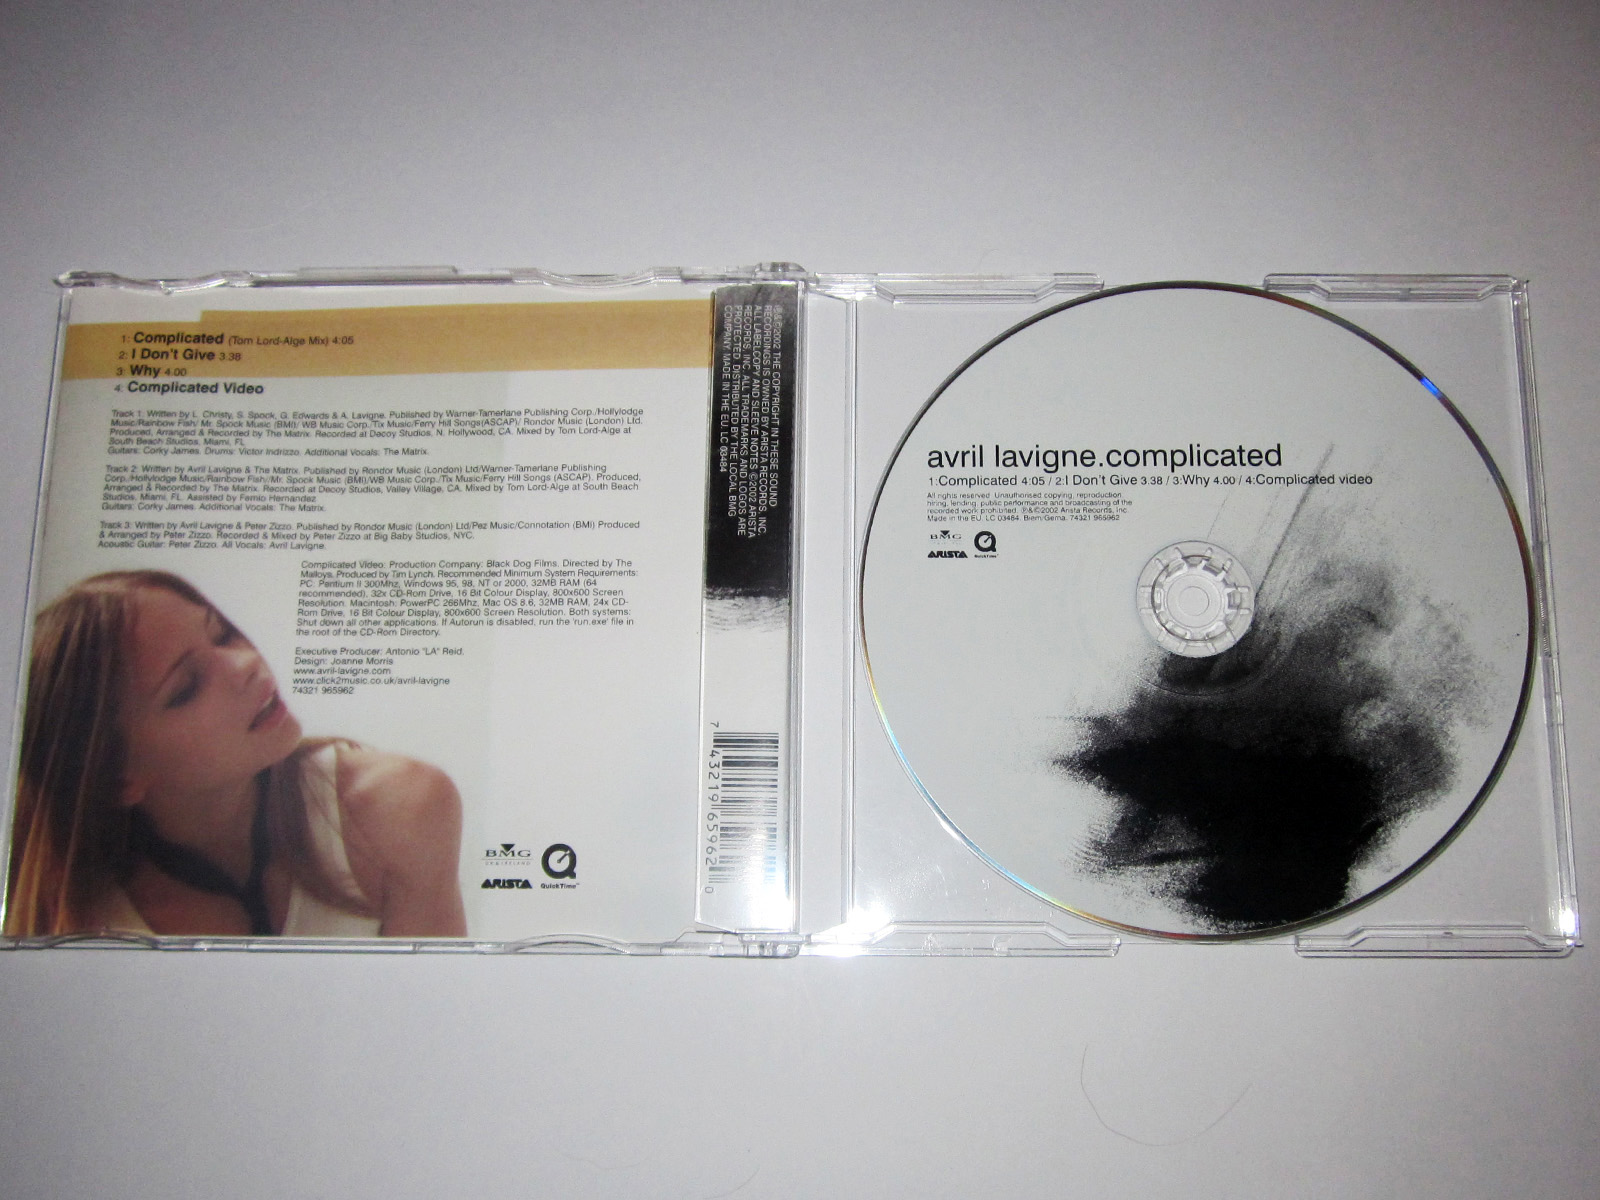 ADRIAN CD COLLECTION: Complicated (UK Single)